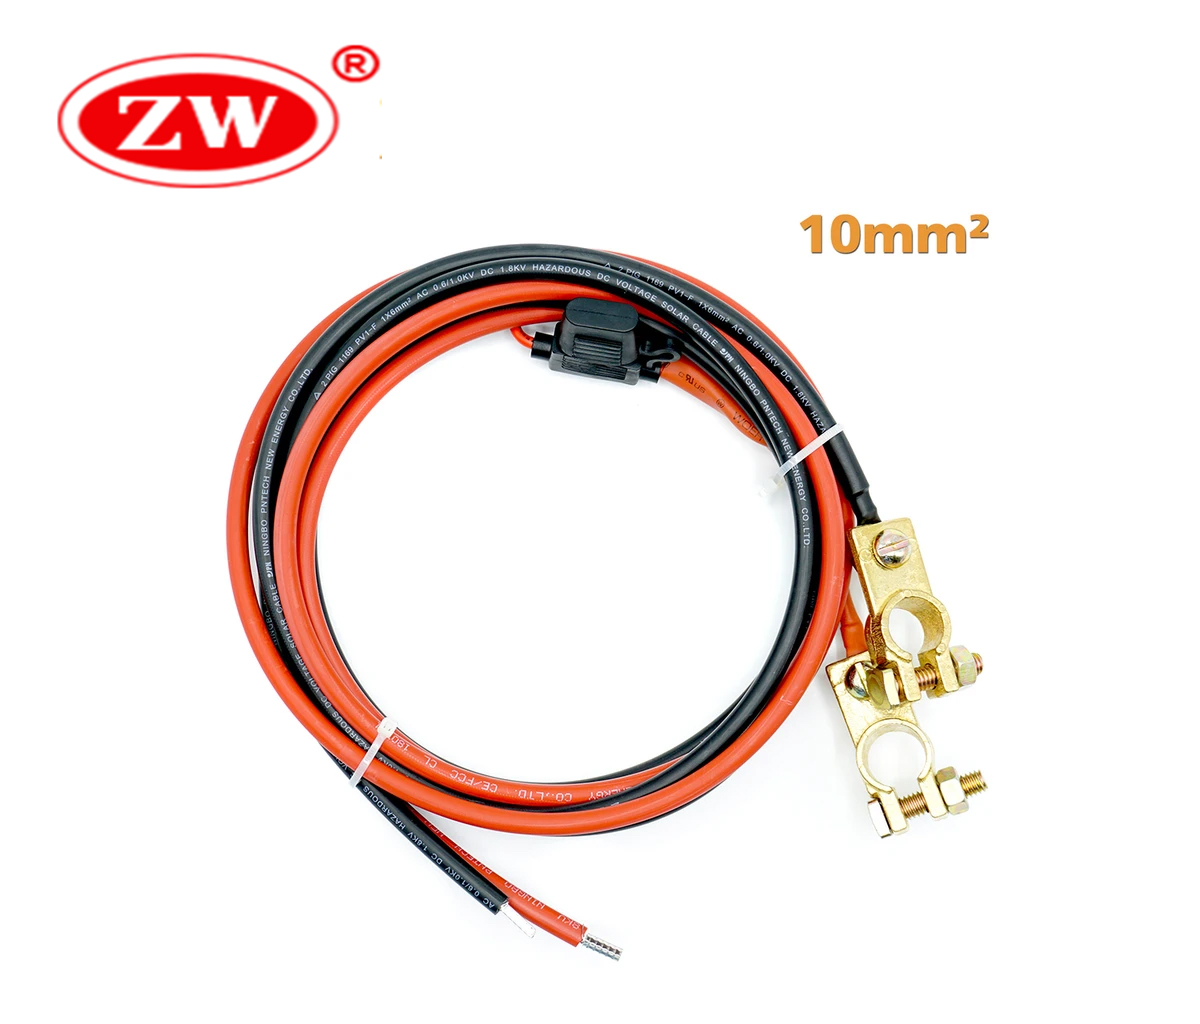 10mm battery cable